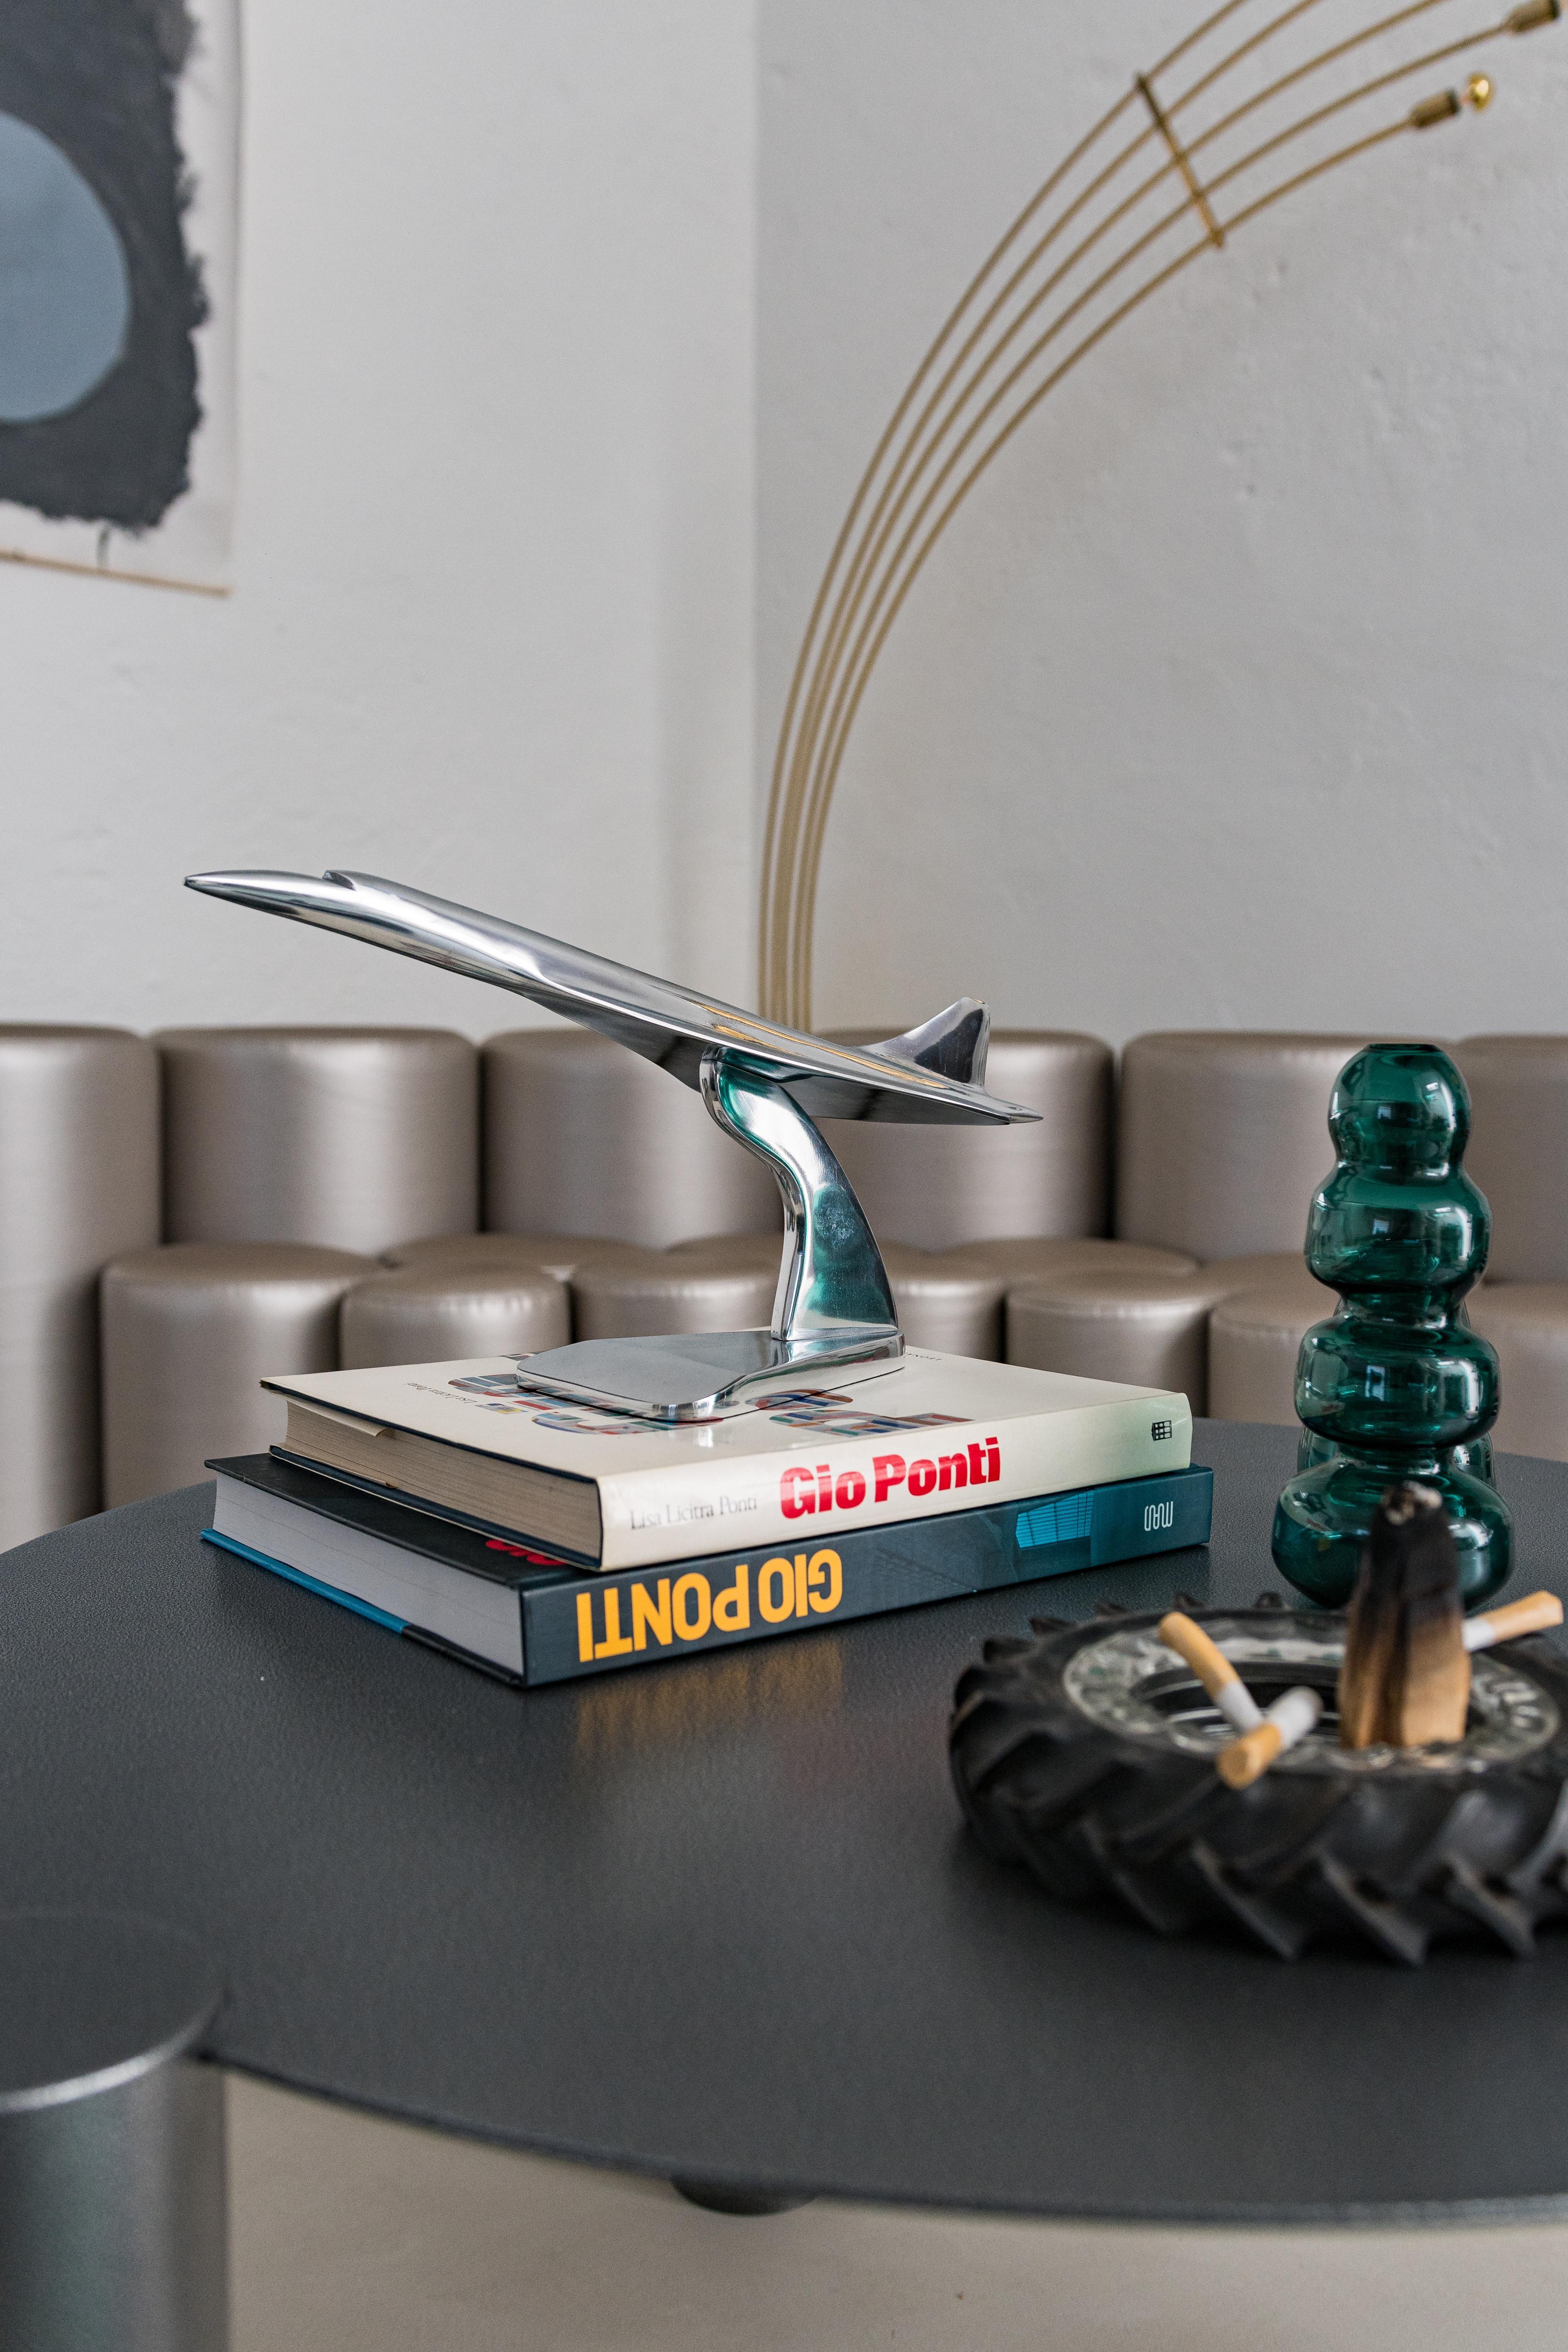 Decorative Item - Concorde Model - Stylish Decor

Spinzi is a Milano based creative atelier specialised in furniture design as well as sourcing and trading relevant mid-century collectible design. Check out our storefront and website for a